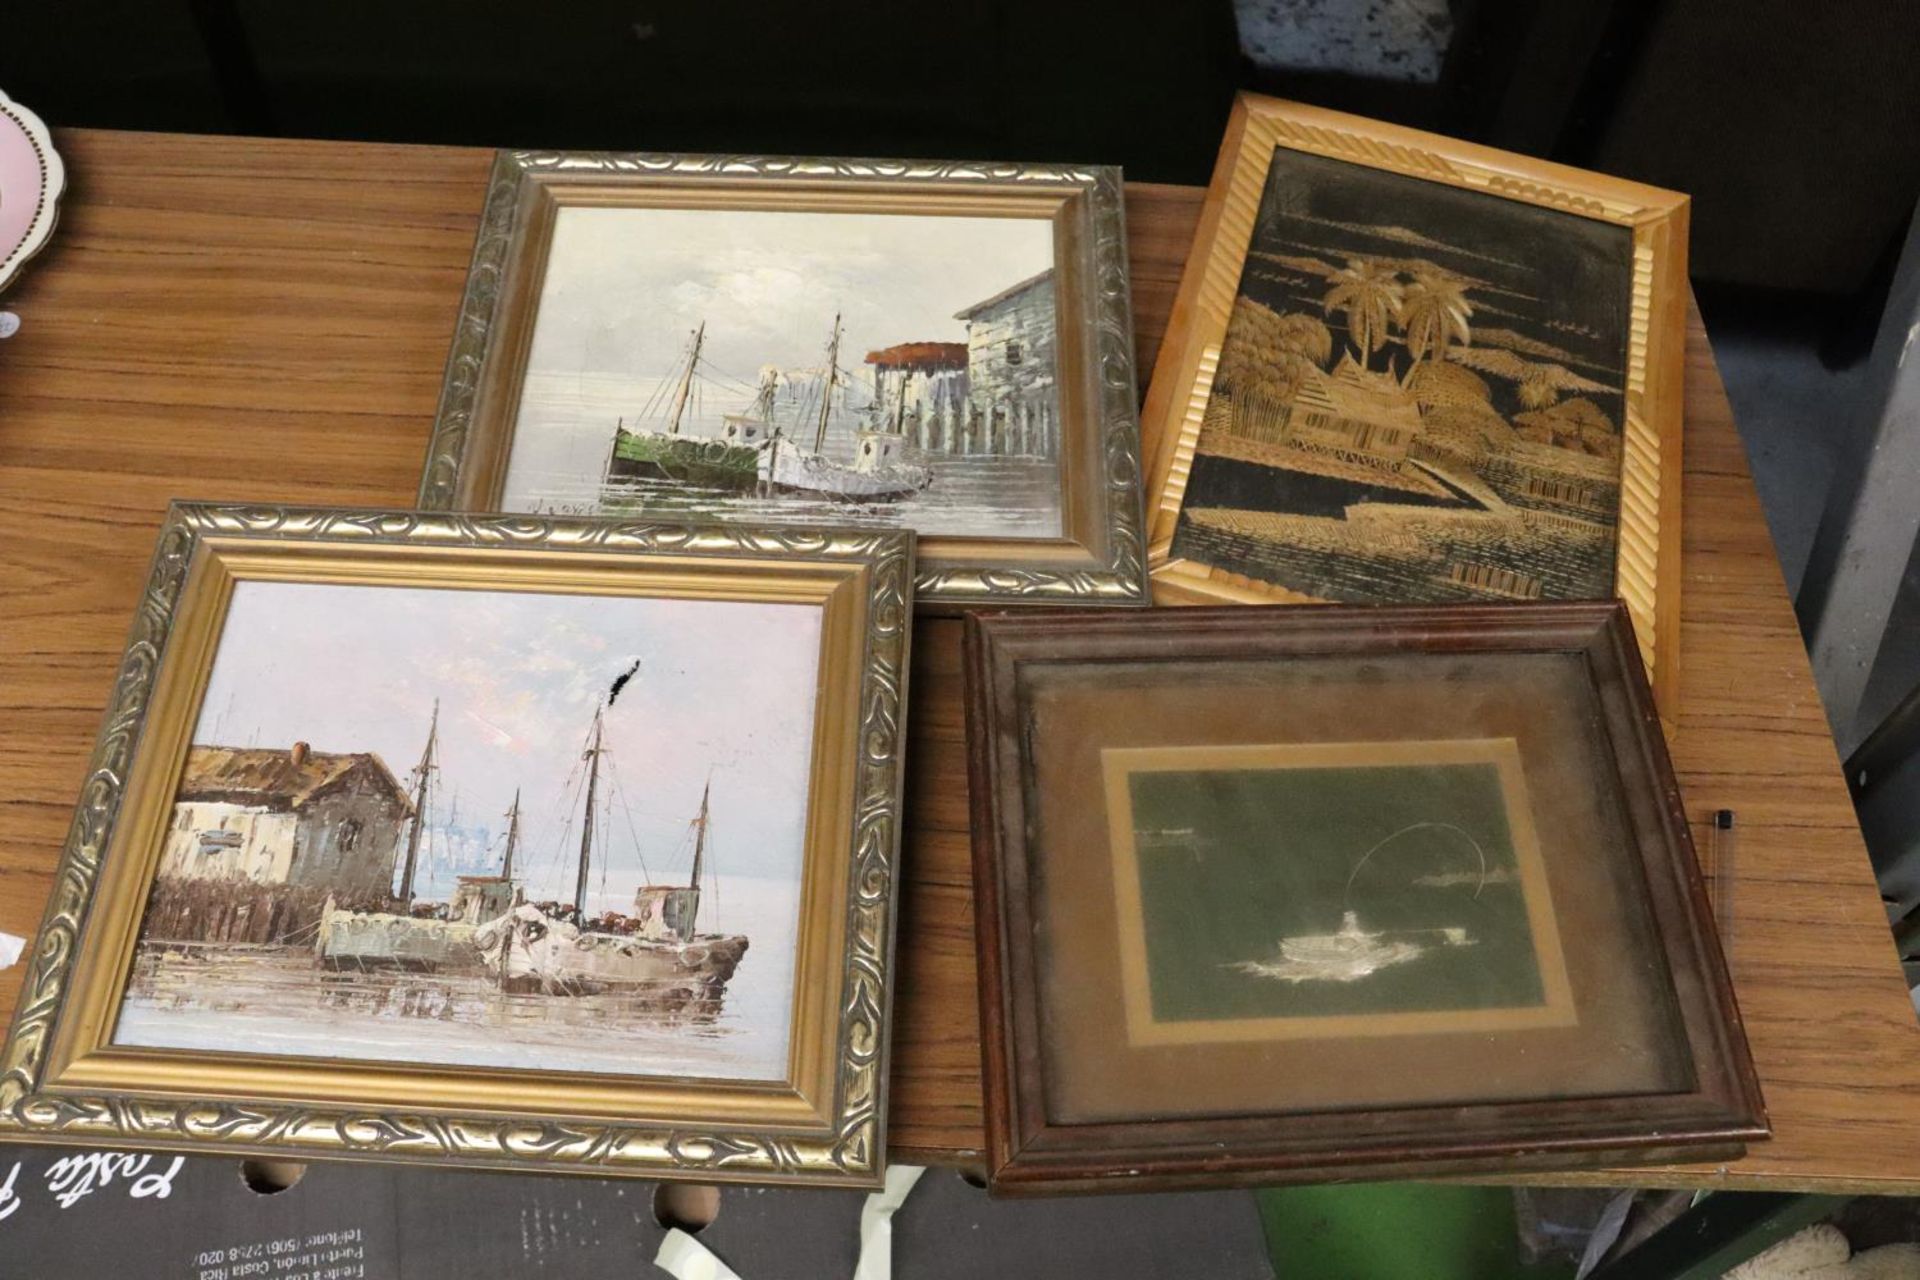 TWO FRAMED OILS ON CANVAS OF BOATS, ONE A/F, A FRAMED 3-D IMAGE OF A FISHERMAN IN A BOAT, PLUS A